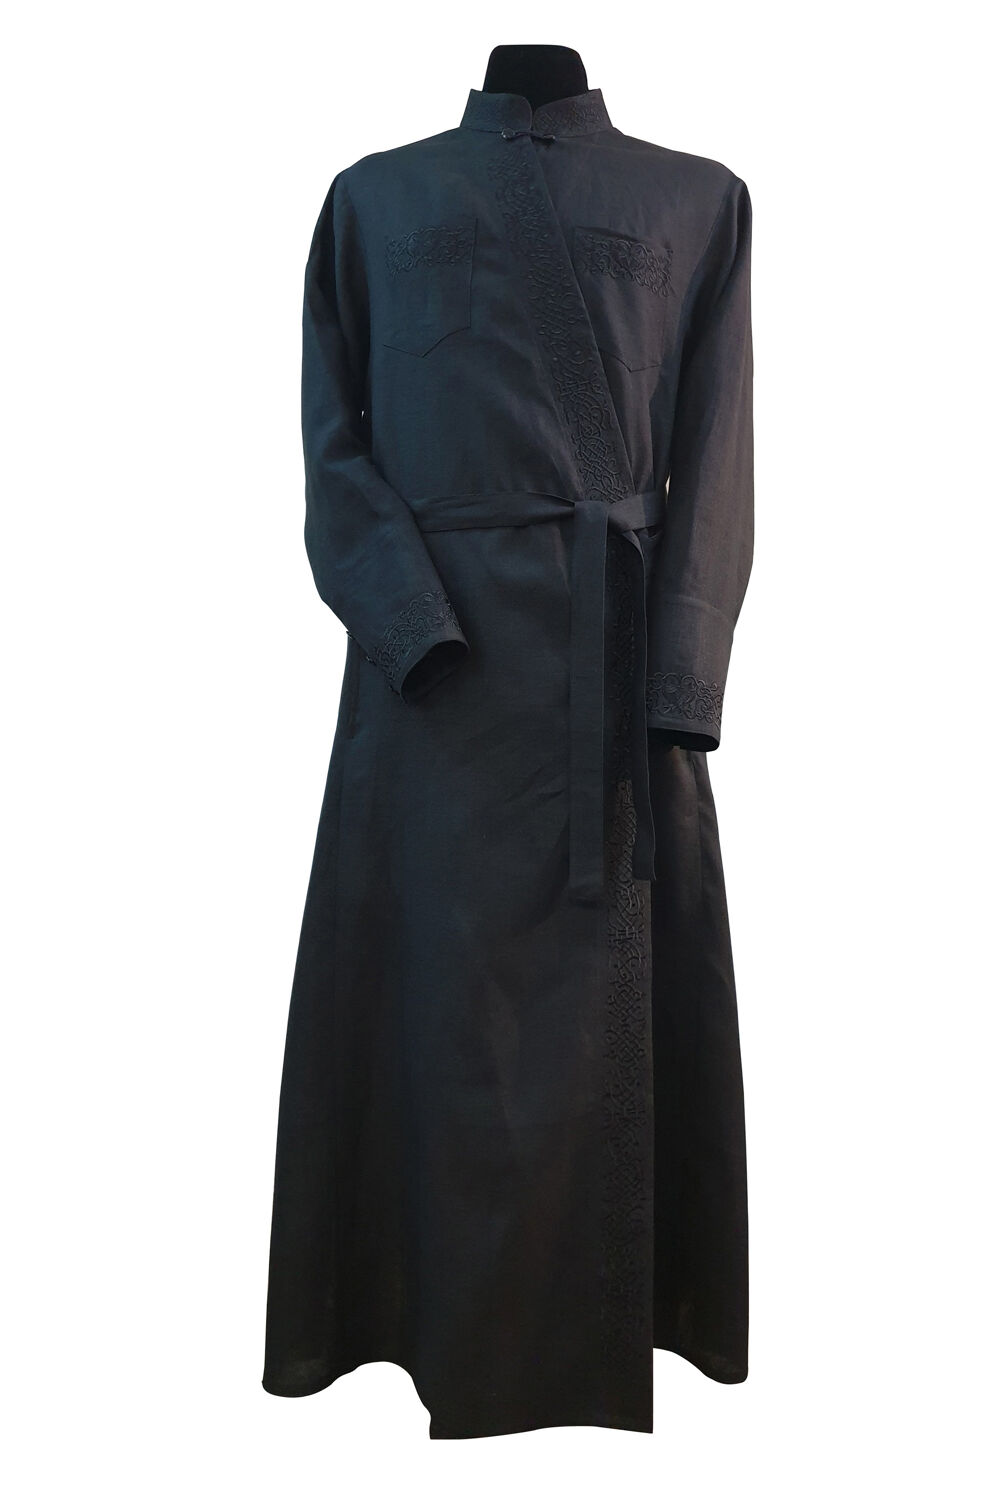 Greek cassock with embroidery